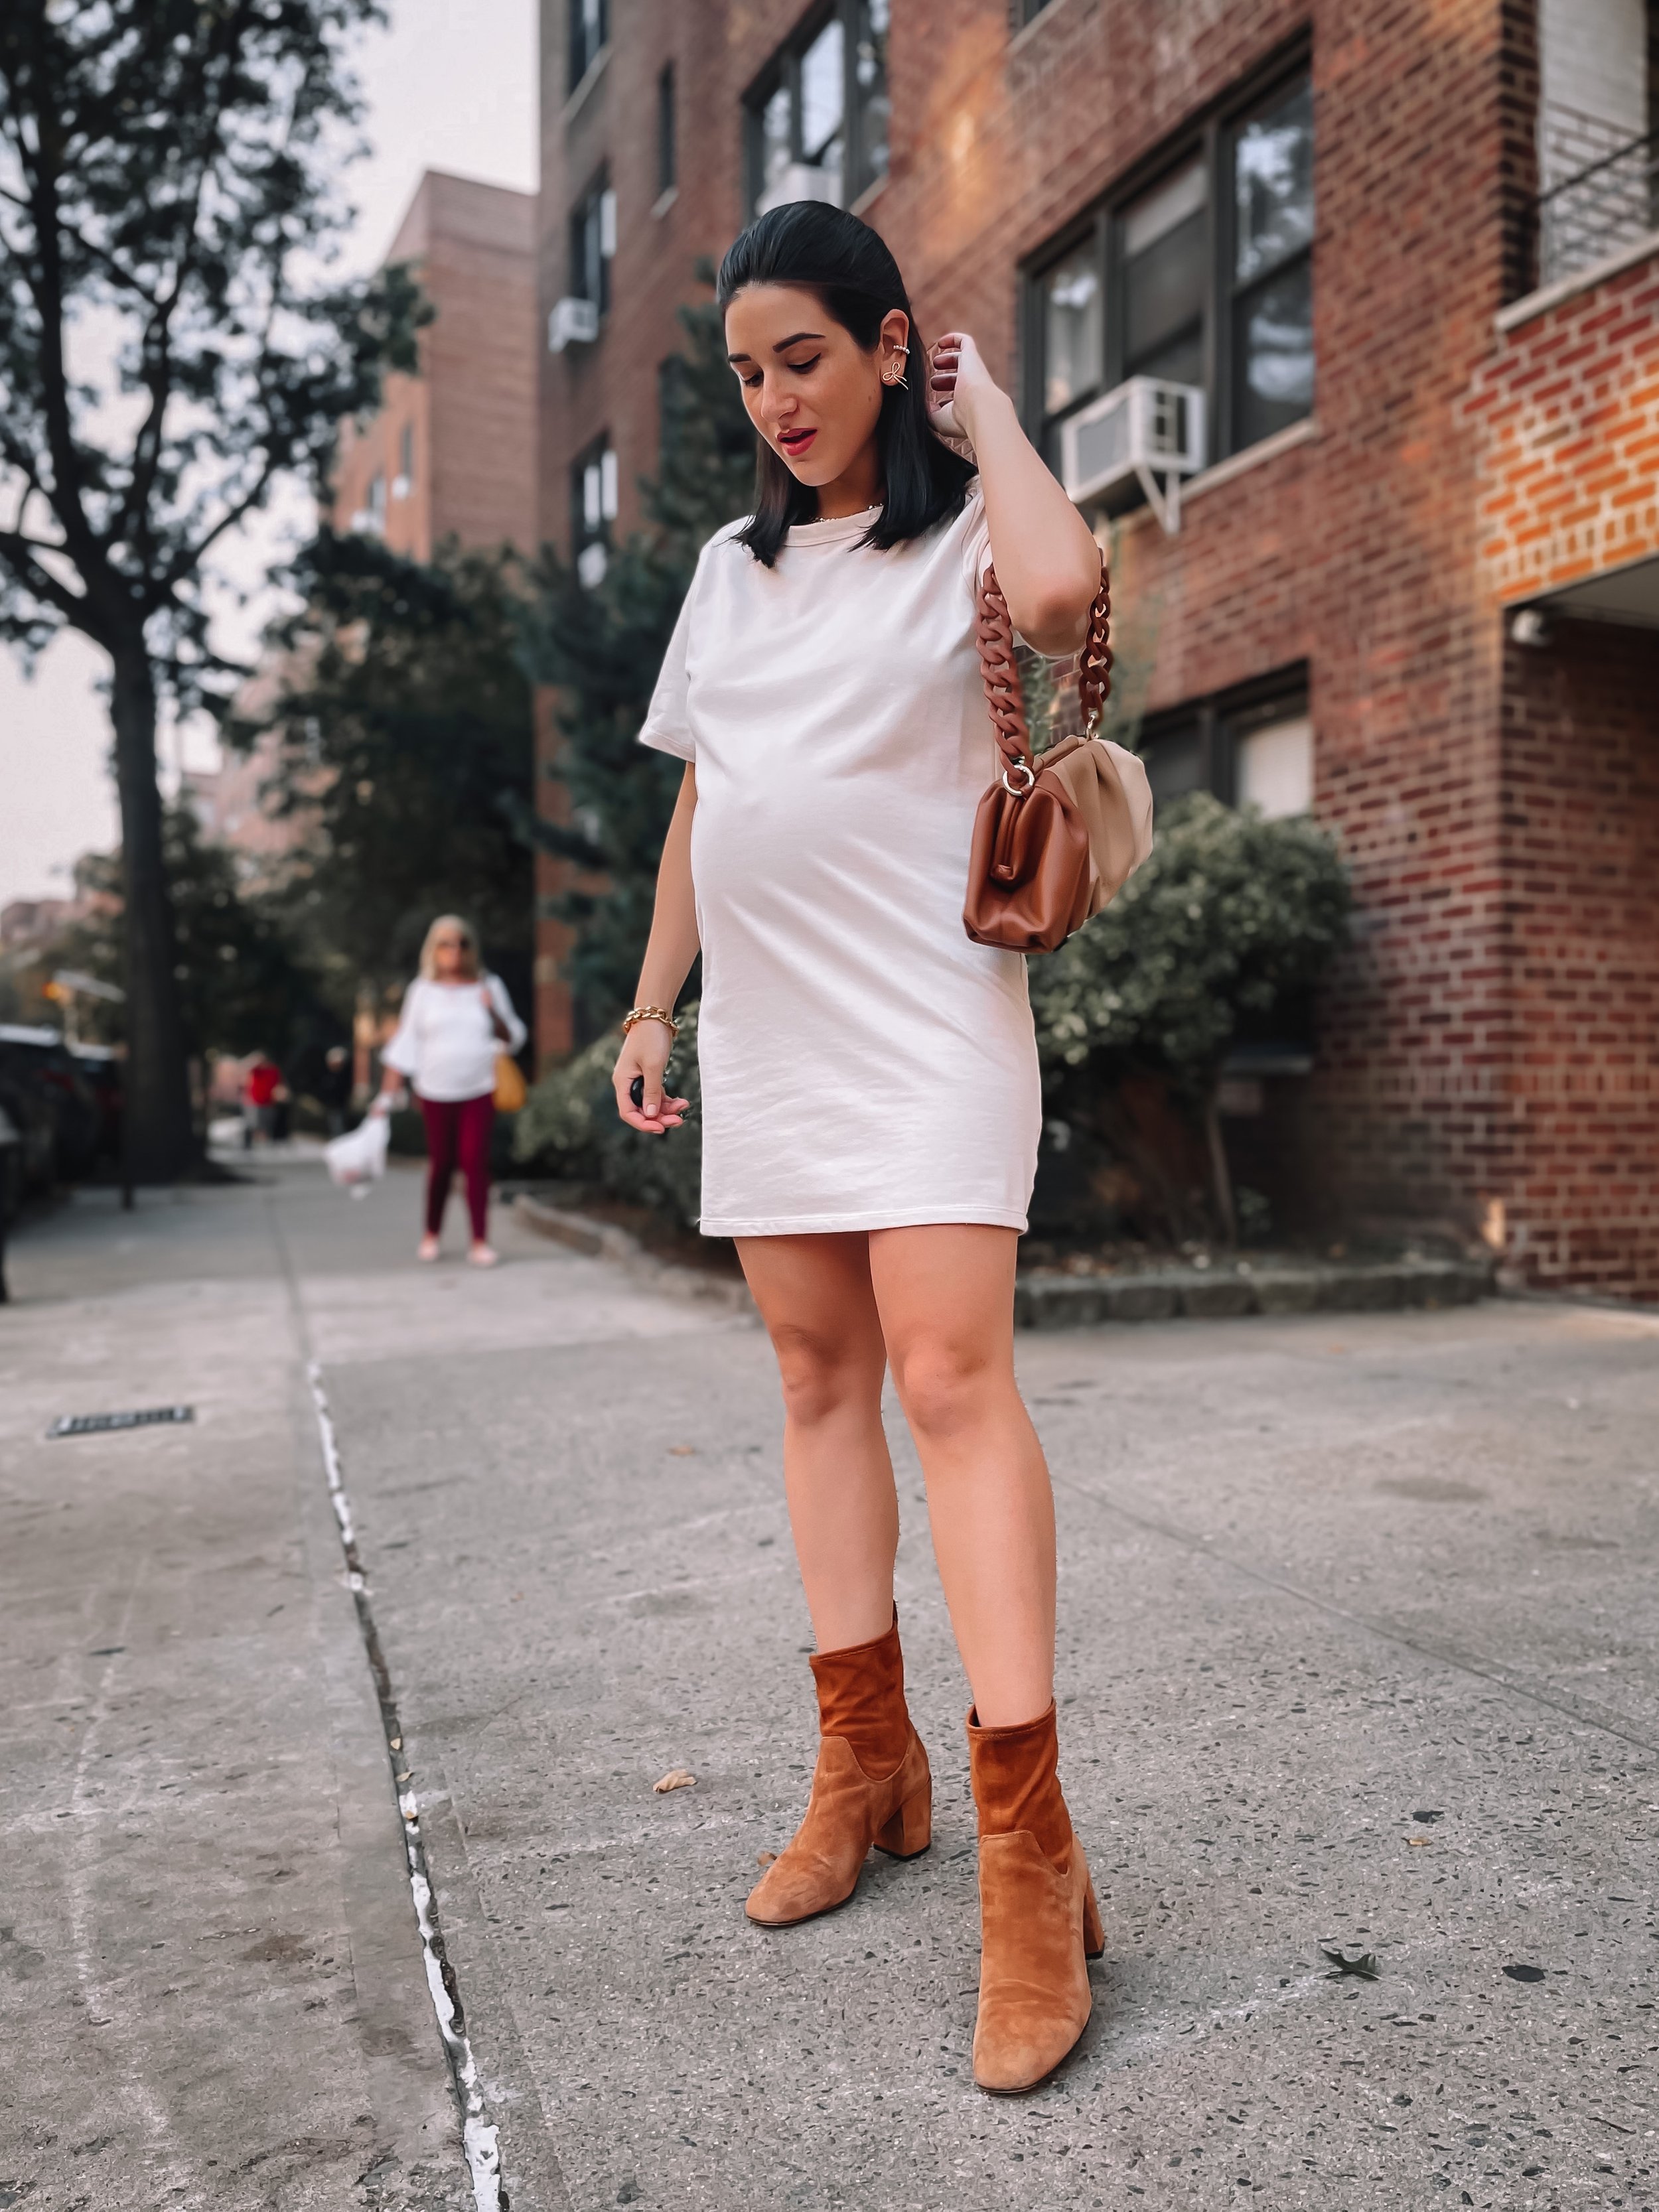 Cream T-Shirt Dress + Tan Booties 35 Week Update Roolee Vegan Leather Brown Bag Fall Look Outfit Esther Santer NYC Street Style Blogger Boots Colder Weather What To Wear Buy Bump Styled Bumpdate Pregnancy Fashion Pregnant Maternity Trends Bow Earrings.JPG